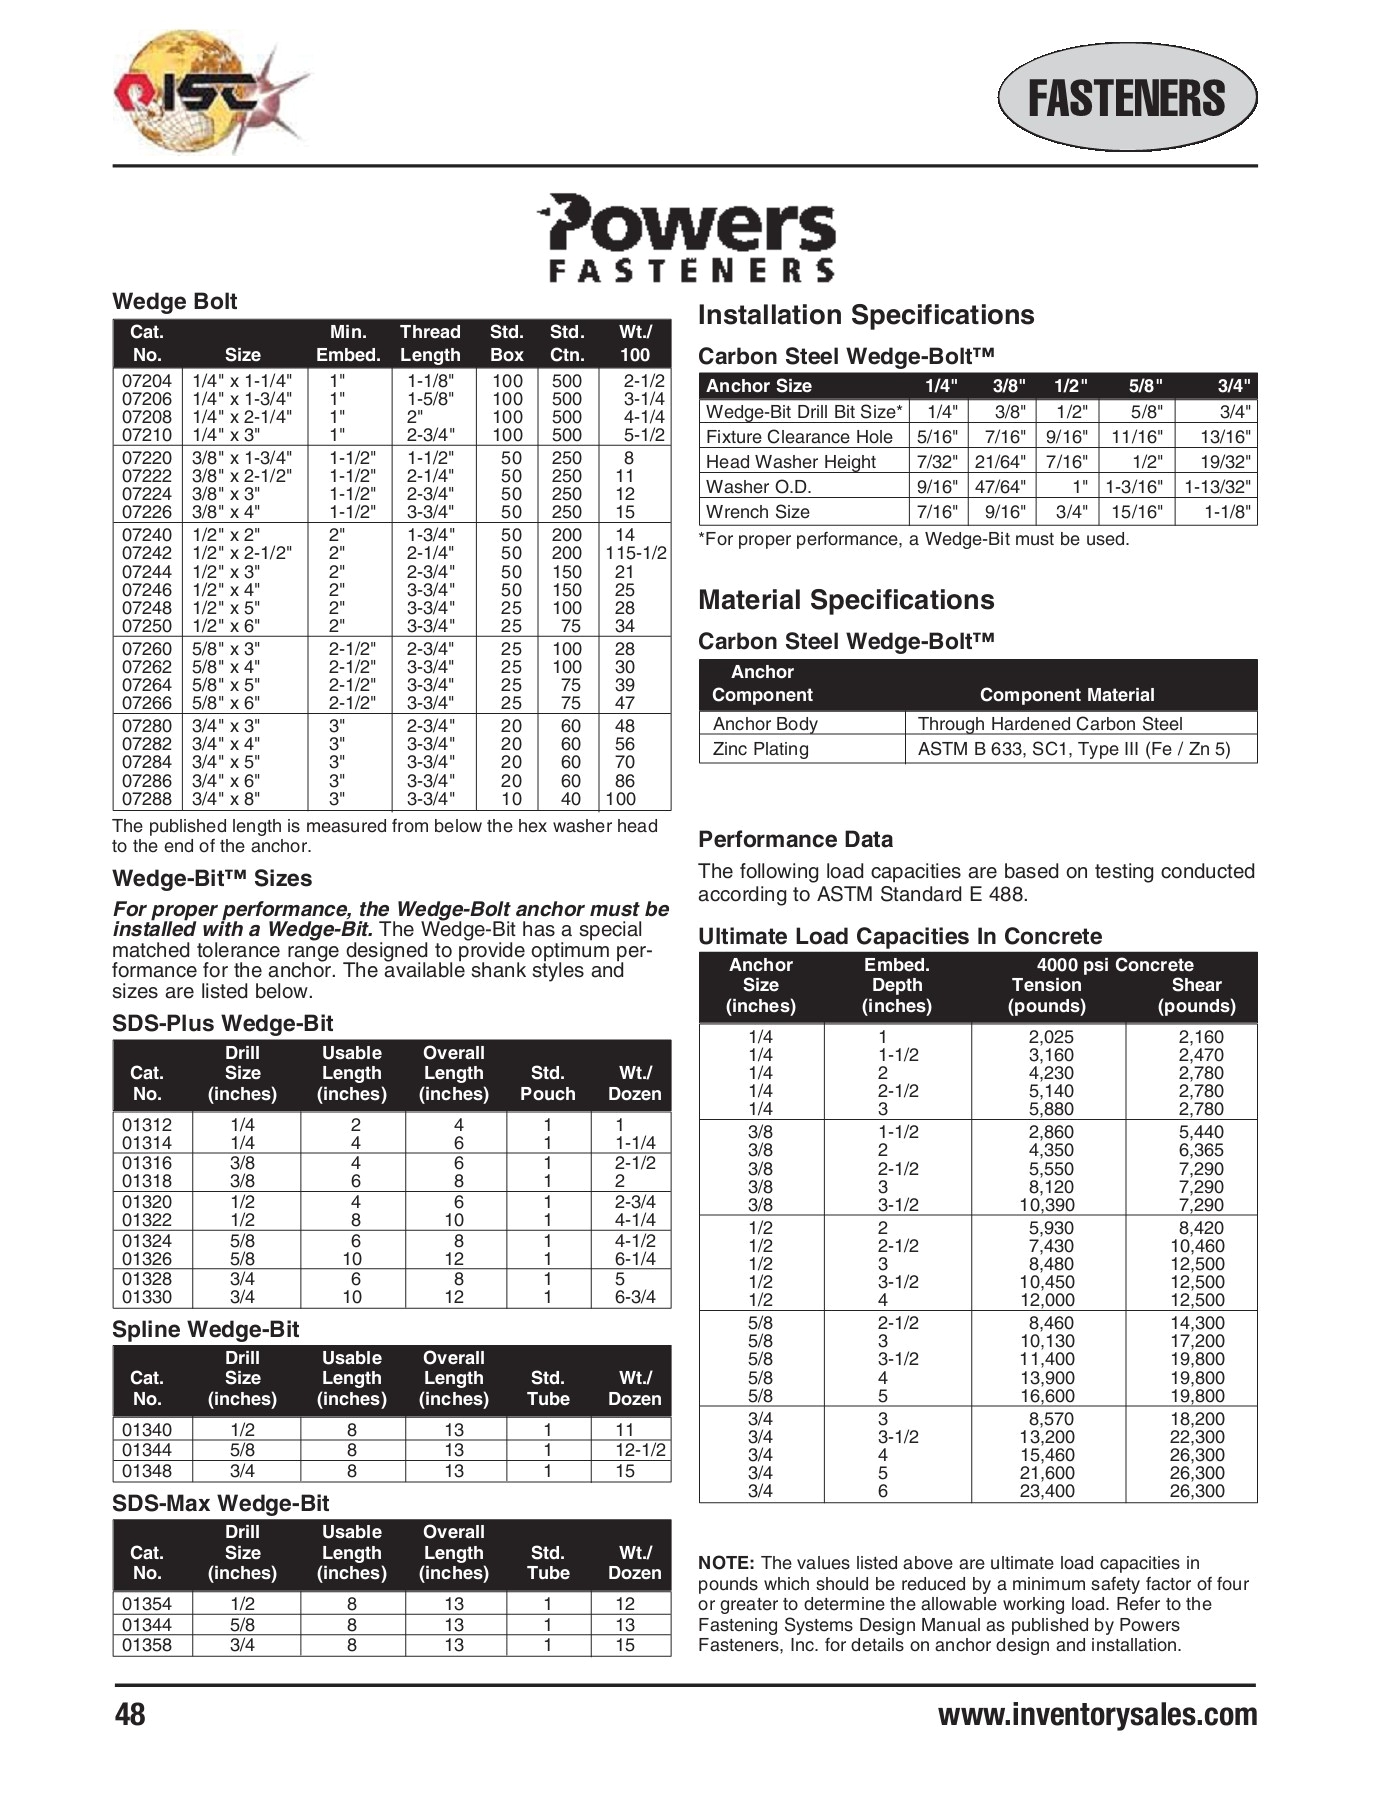 fasteners catalog inventory sales company pages 51 79 text version fliphtml5